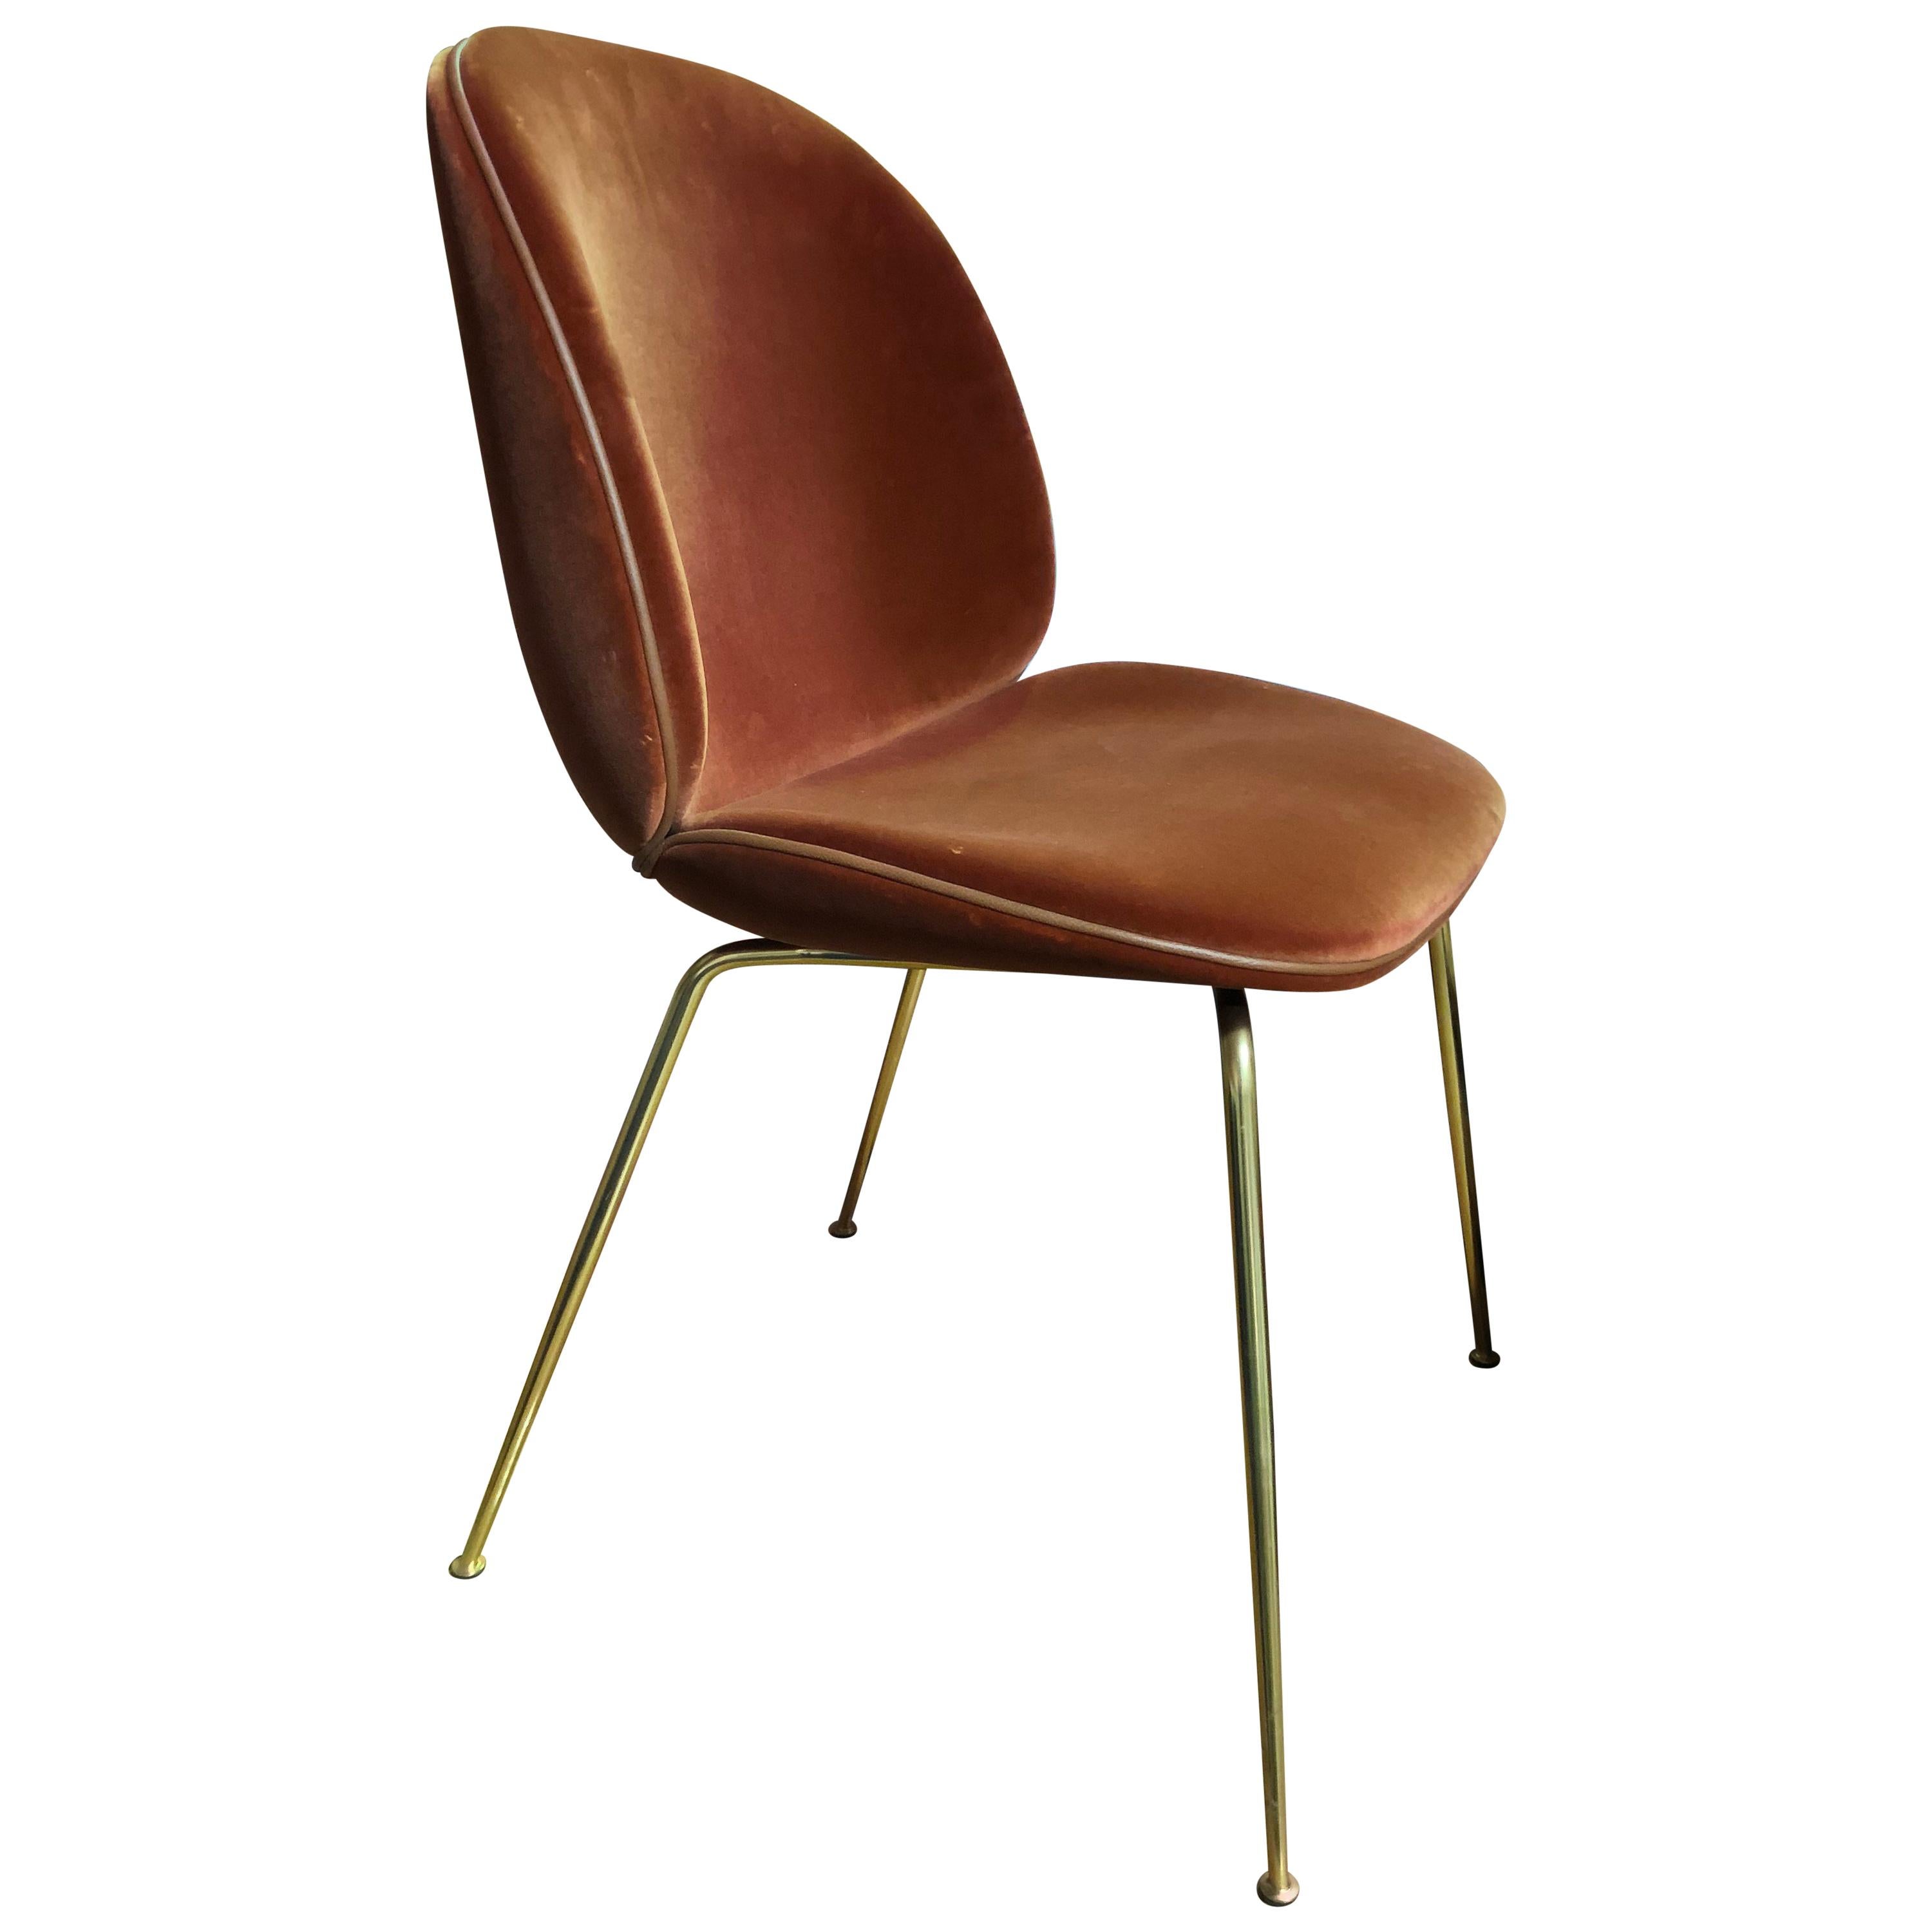 Set of Two Velvet Gubi Beetle Chairs with Conical Legs